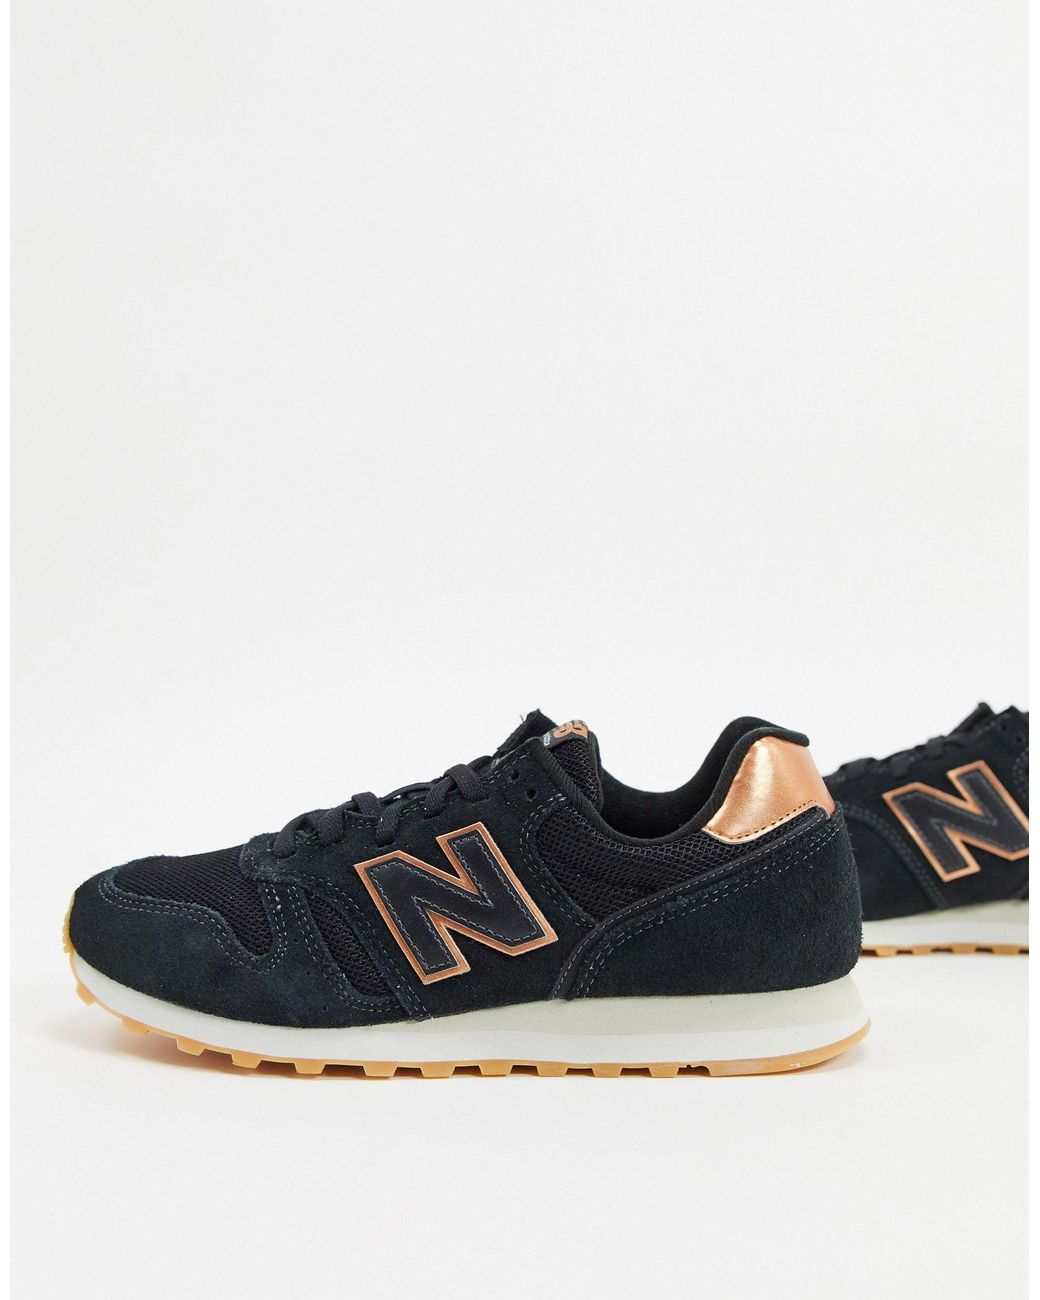 Jong zij is Mantel New Balance 373 Womens Black / Rose Gold Trainers for Men | Lyst